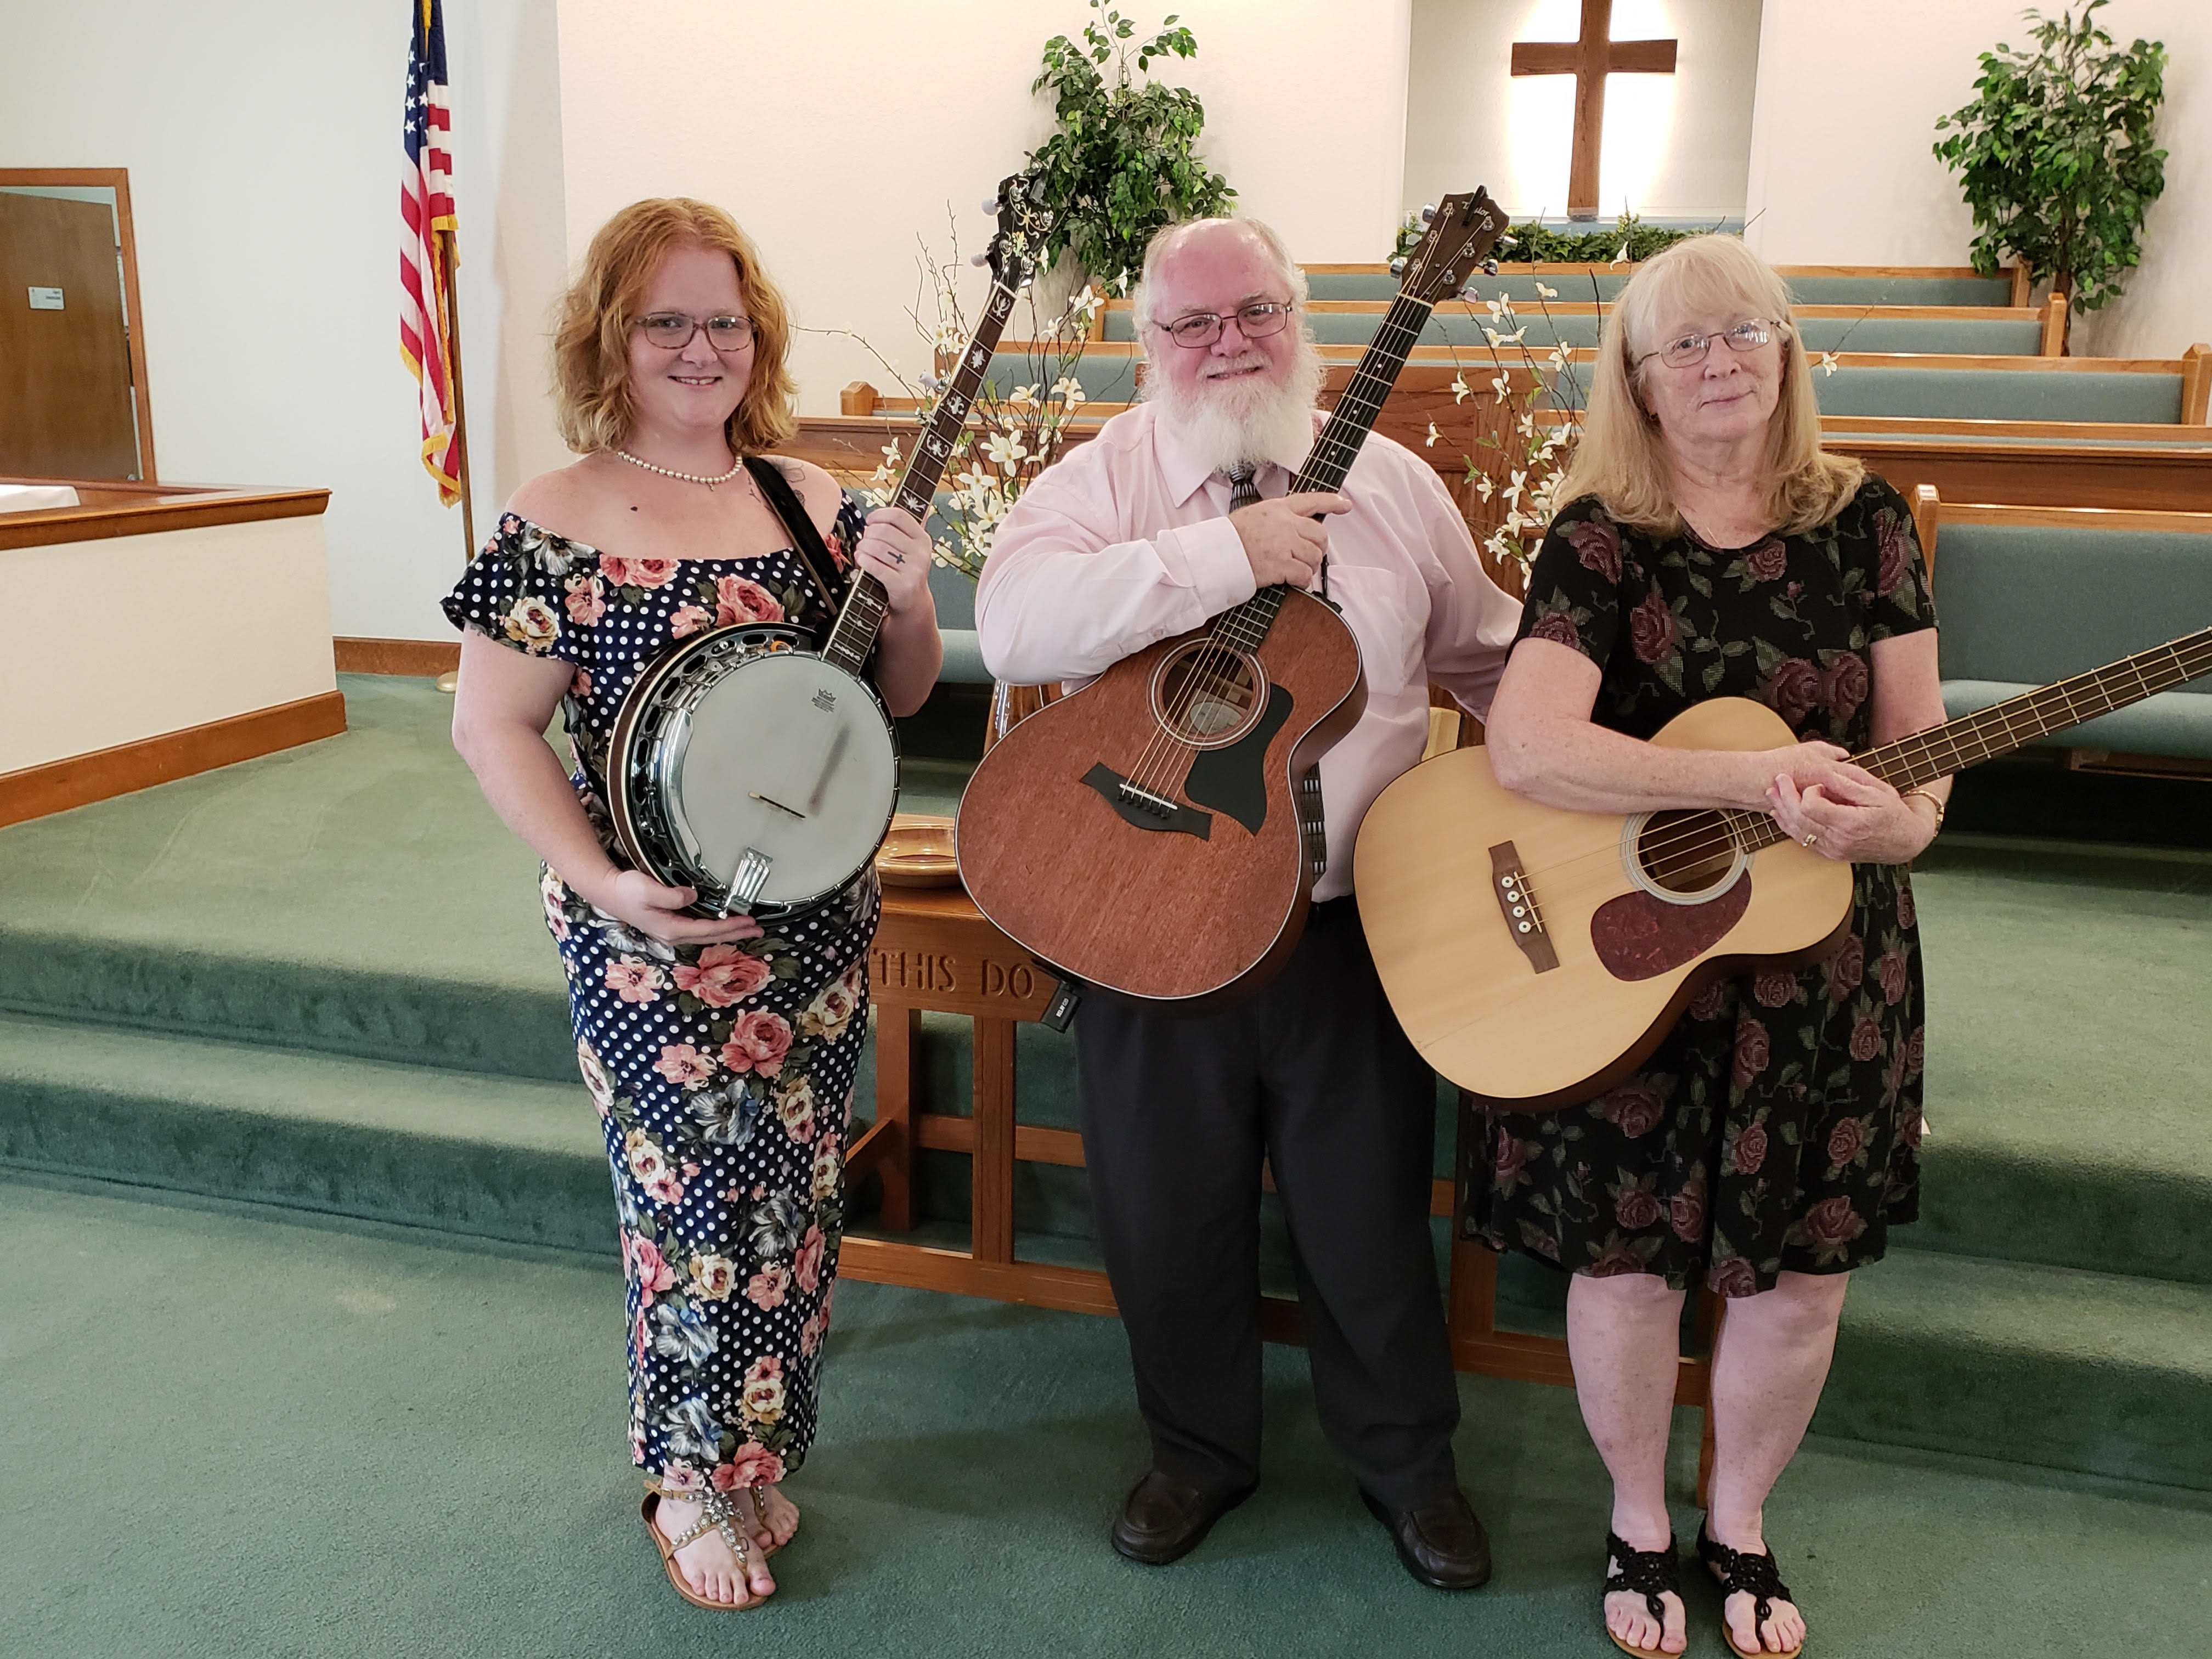 Muscial worship leaders,one holding his acoustic guitar,one holding her acoustic bass,one holding her banjo